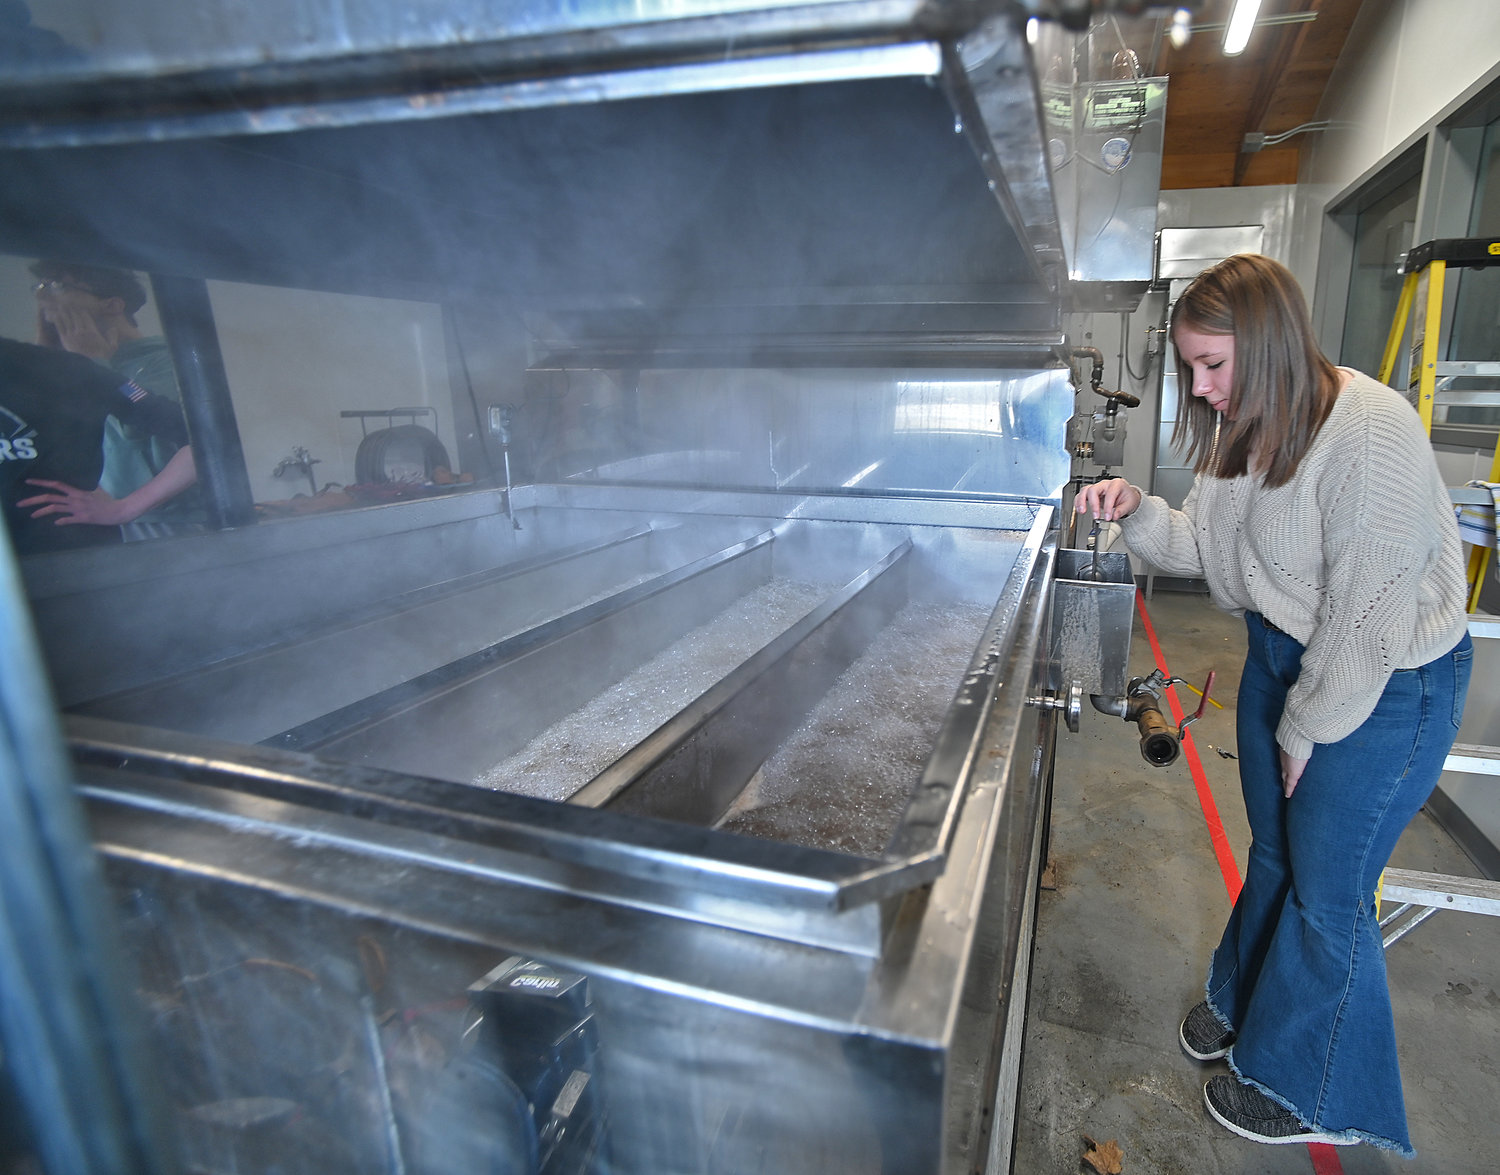 Madison Nolley, a junior at Stockbridge Valley Central School, checks the float while maple sap is boiled down Wednesday, Feb. 15 at the school FFA chapter’s sap house. The float shows the amount of sap that is in the boiler at any time and more sap is allowed into the boiler as the level goes down.